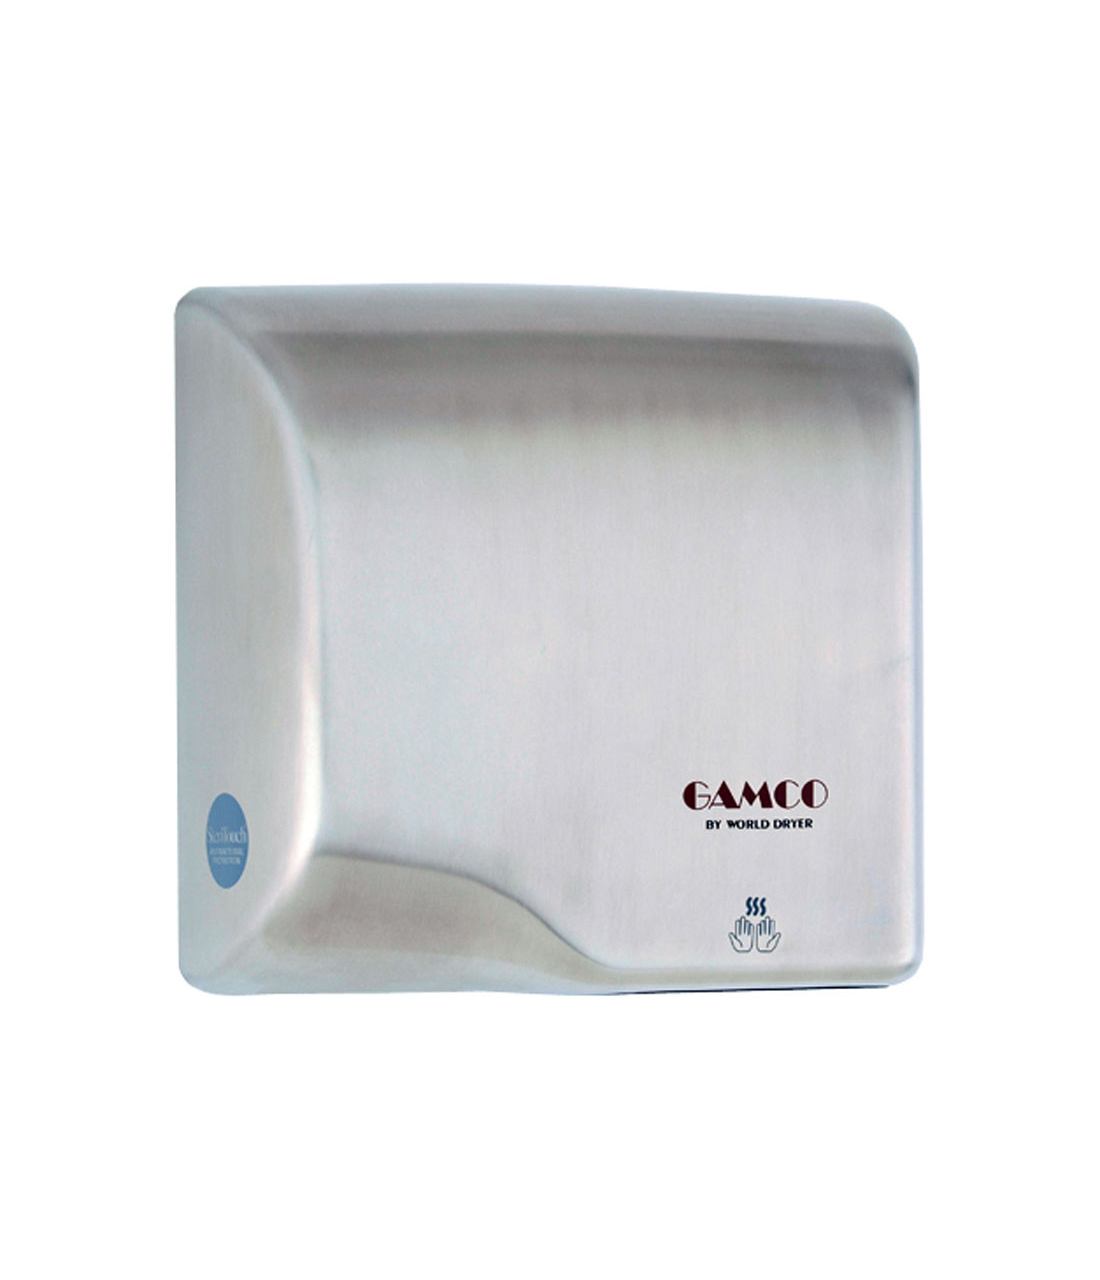 Surface-Mounted ADA Compliant Hand Dryer - (Model #: dr-5128)-image